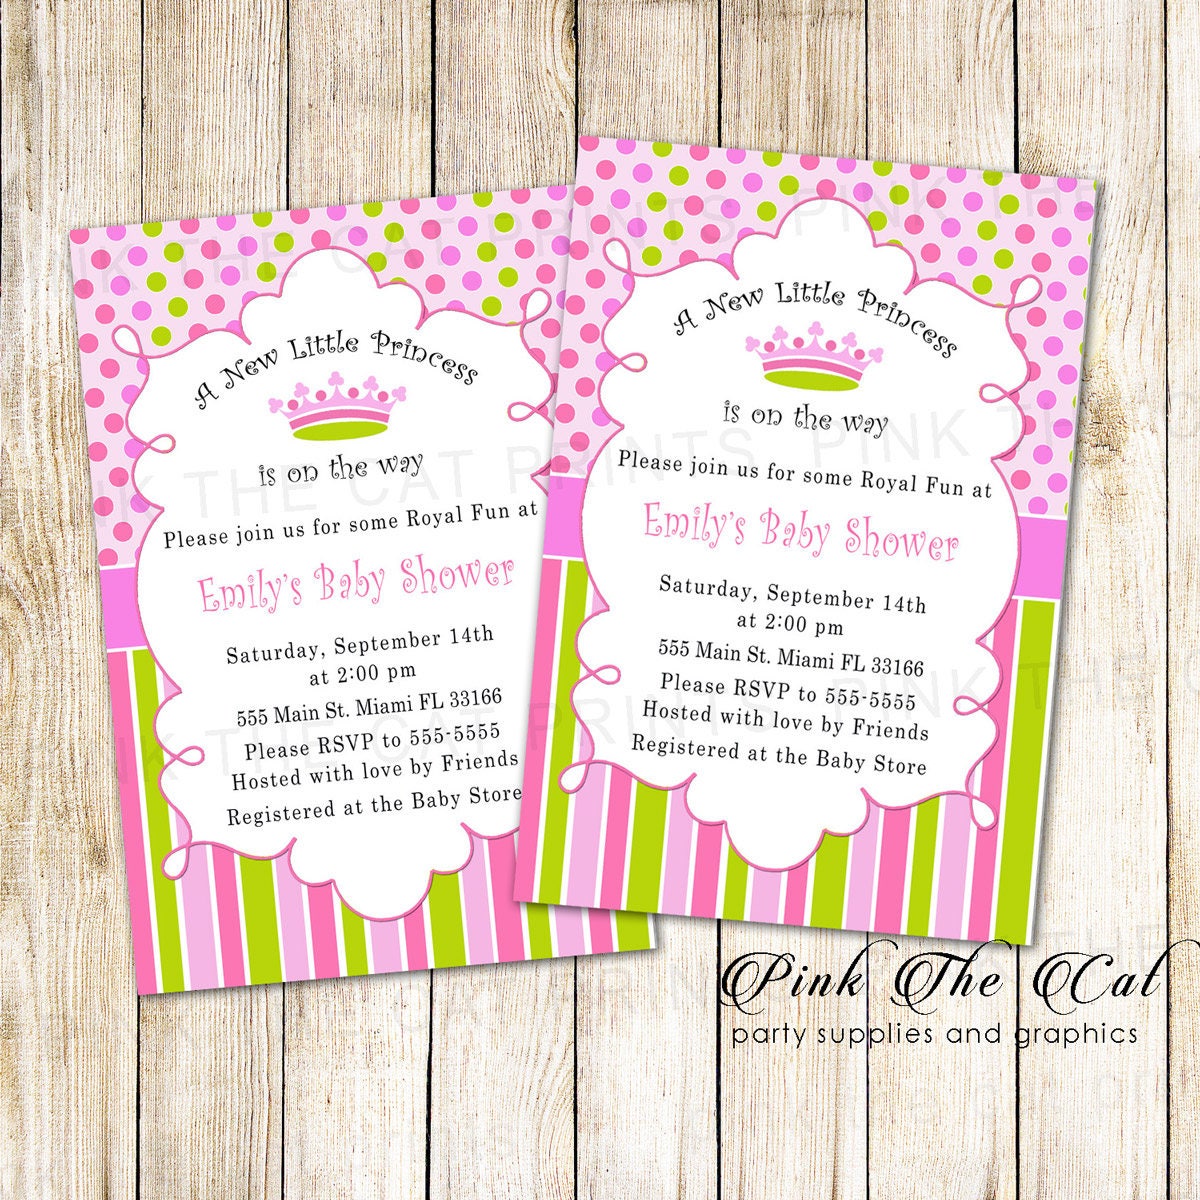 Princess Invitation - New Little Baby Shower Card Pink Mint Girl Invite Also 1st Birthday Party